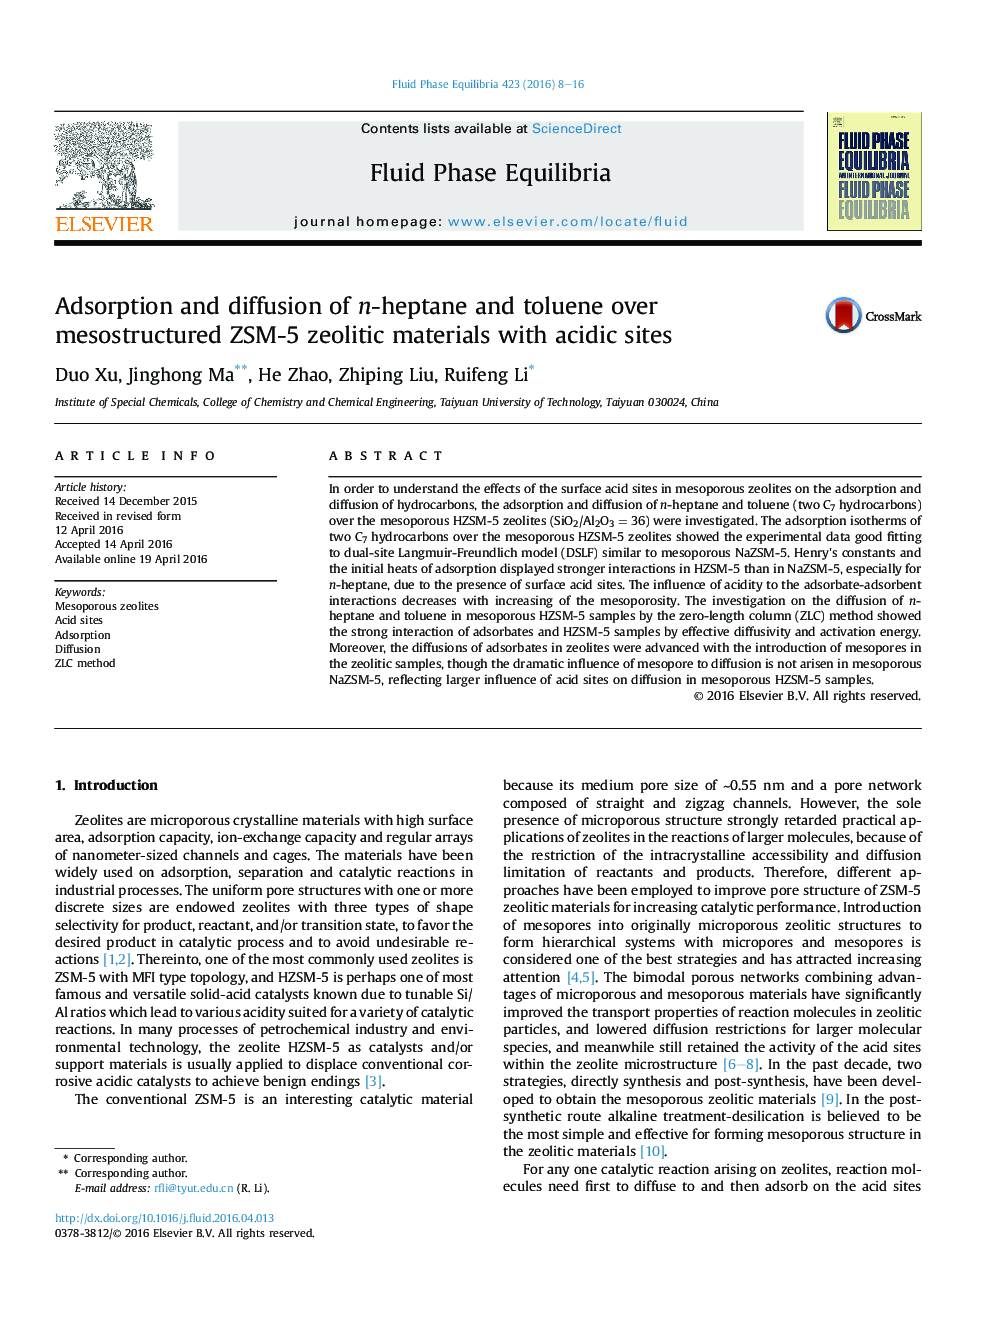 Adsorption and diffusion of n-heptane and toluene over mesostructured ZSM-5 zeolitic materials with acidic sites